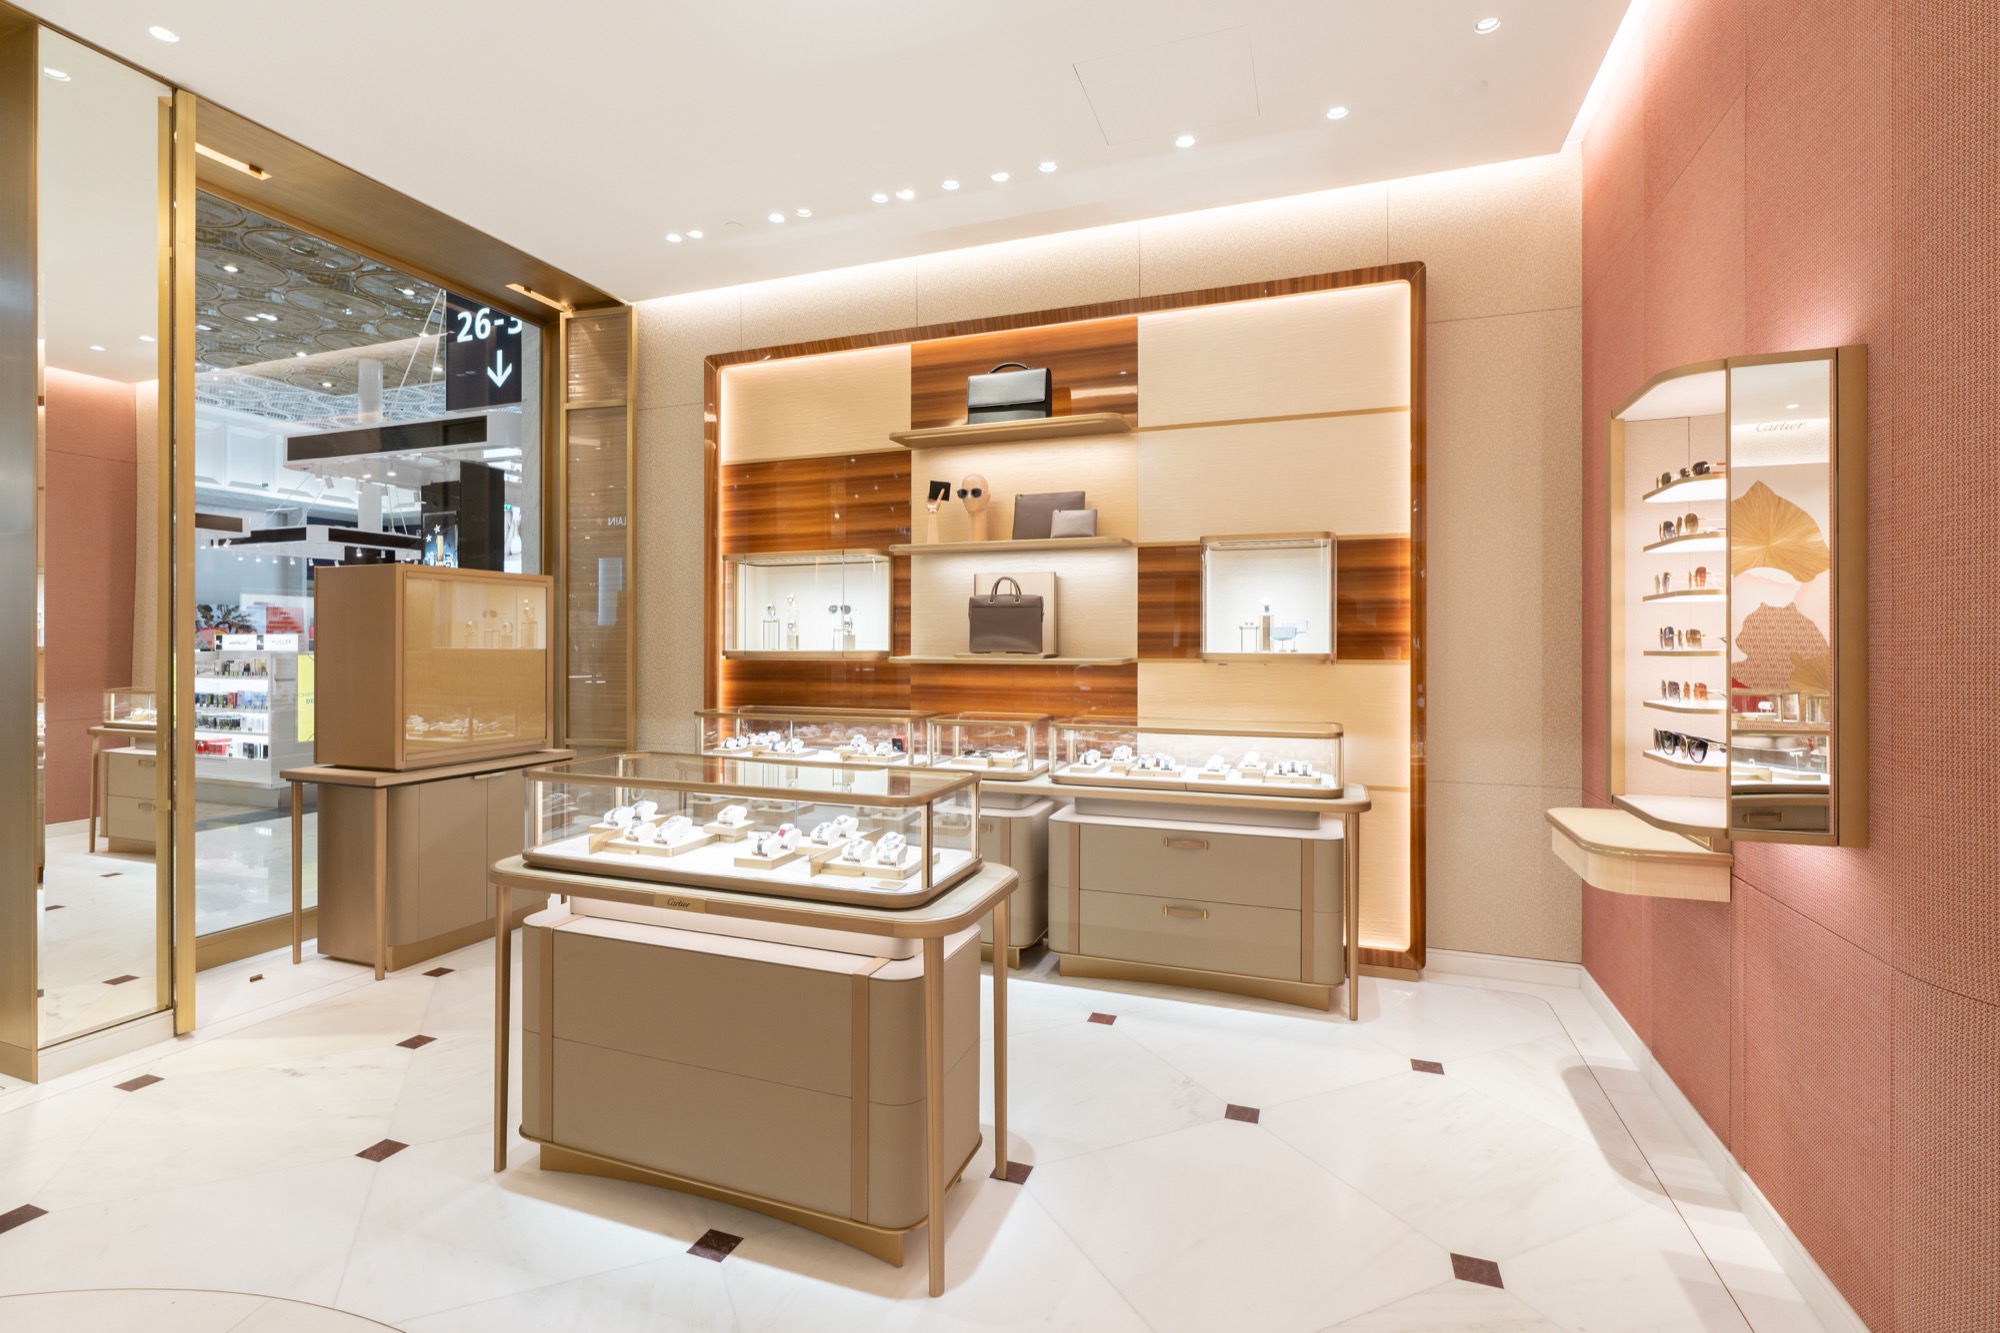 Cartier expands travel retail offer with re-imagined boutiques in